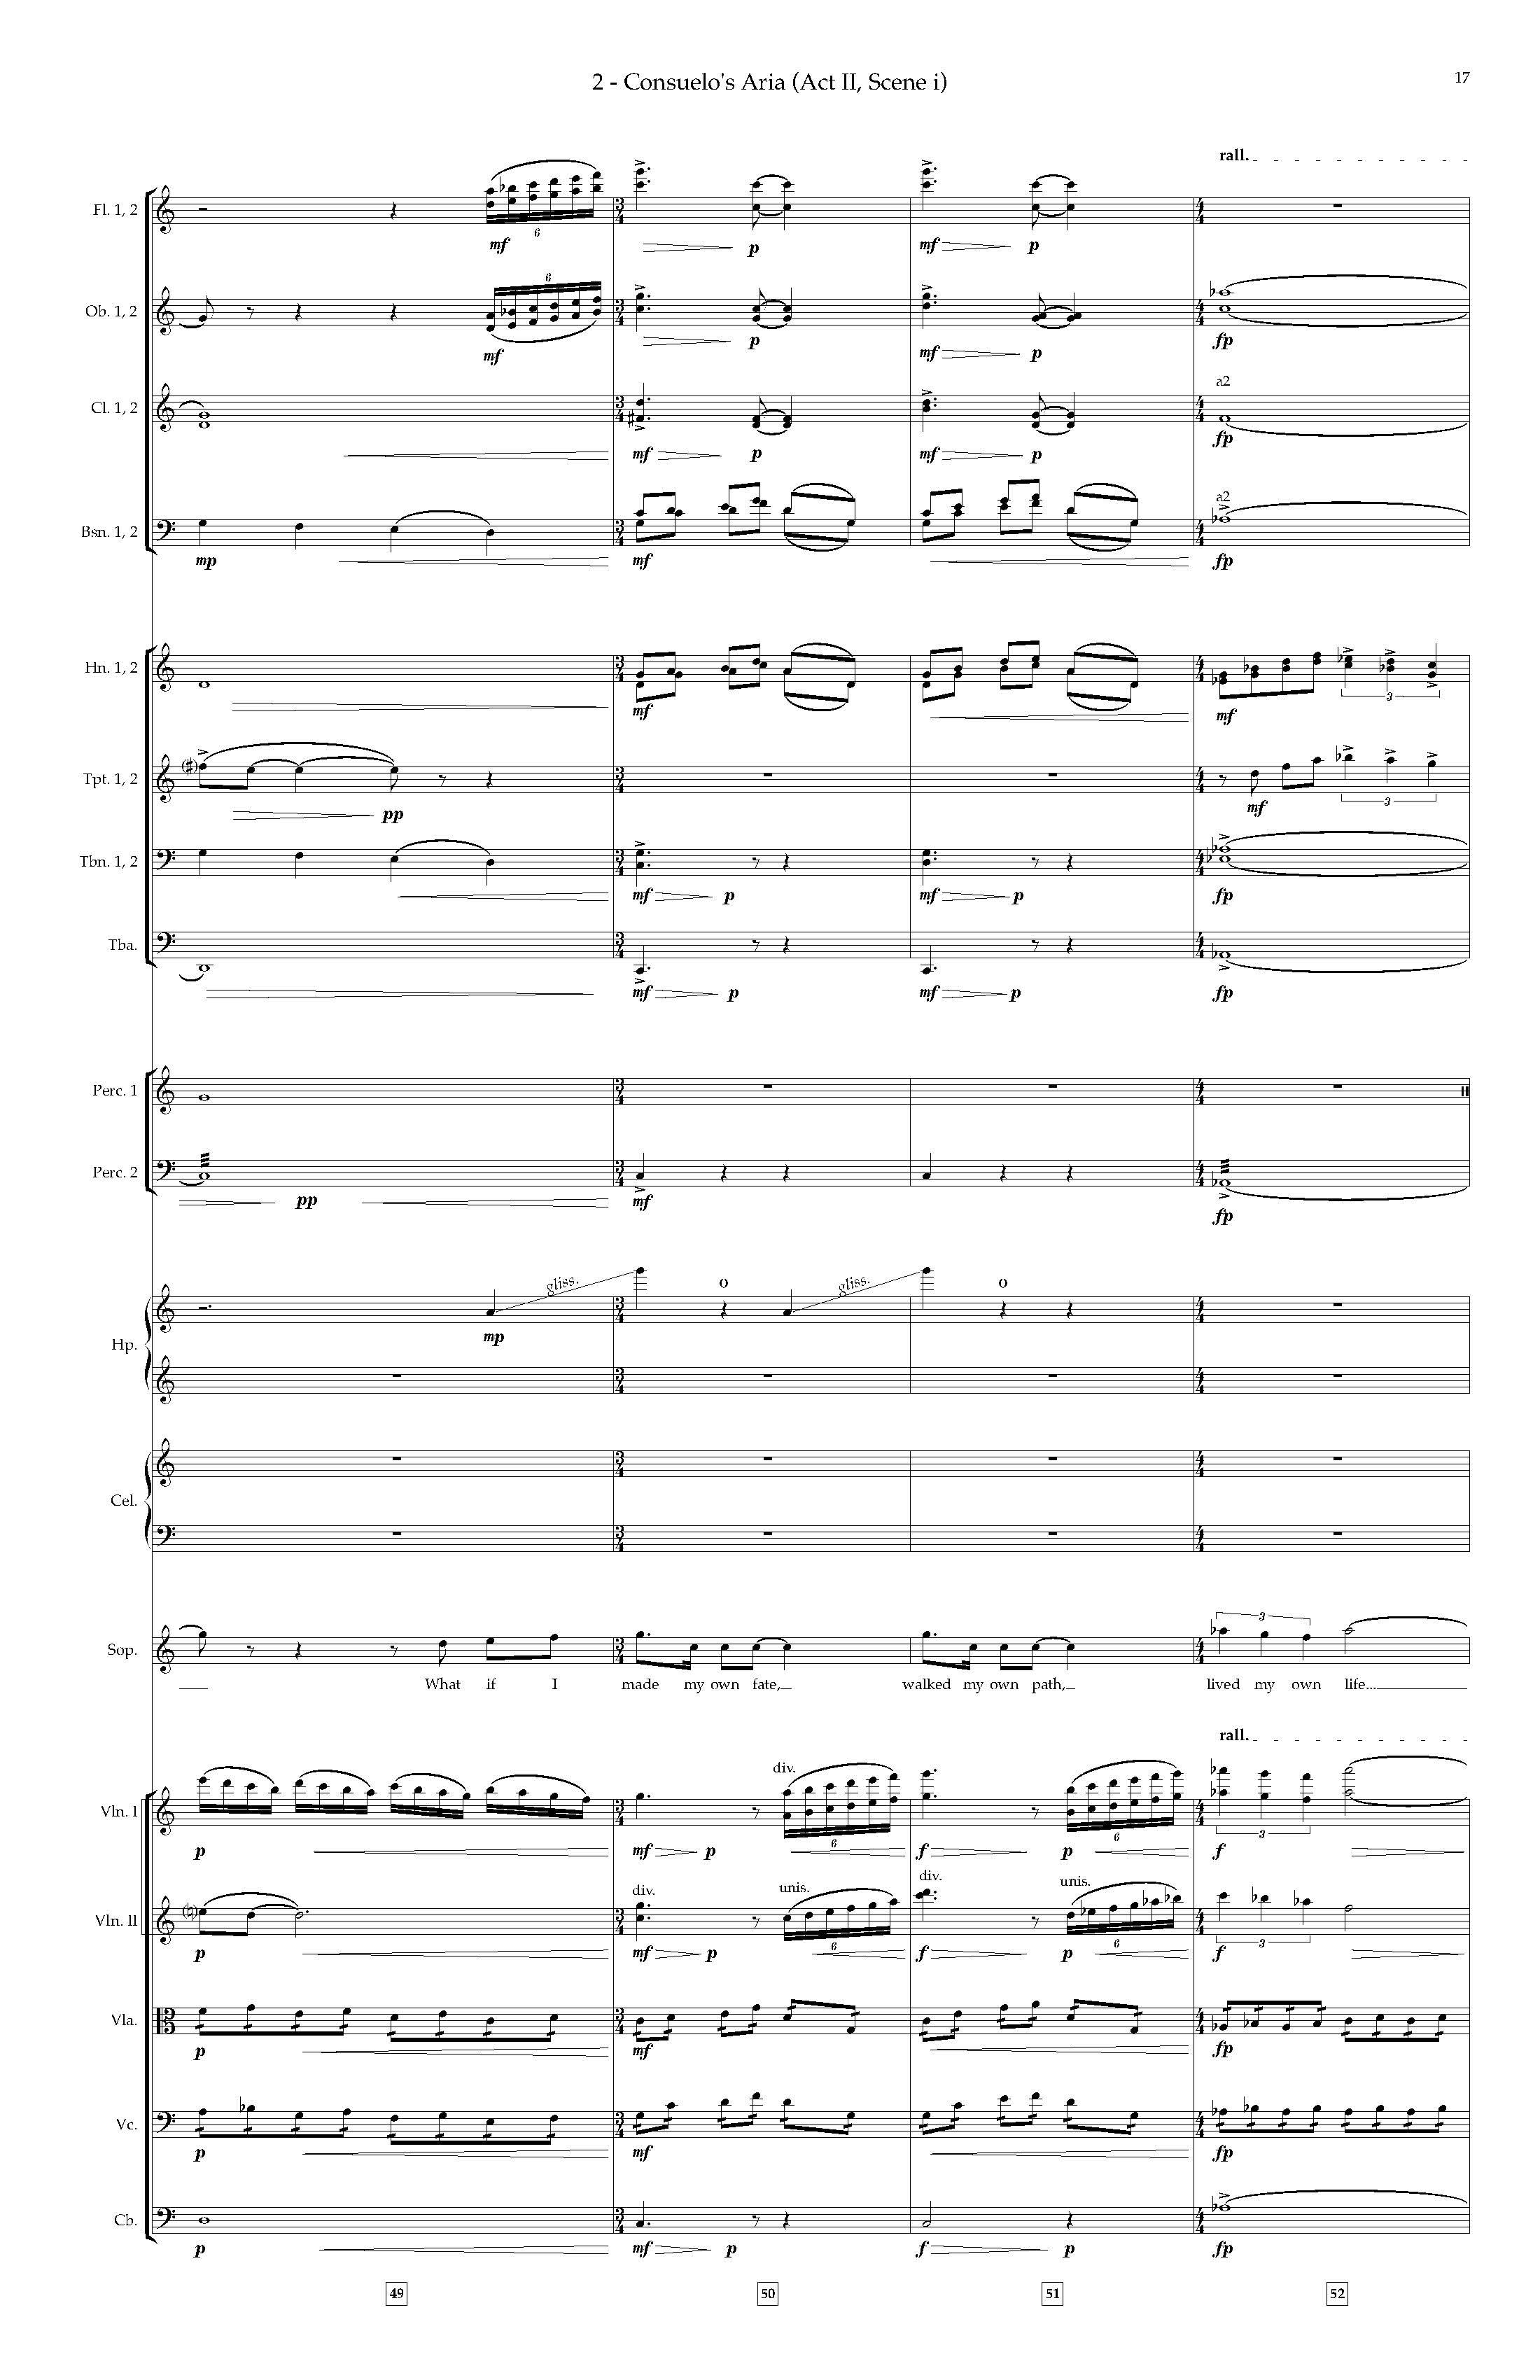 Arias and Interludes from HWGS - Complete Score_Page_23.jpg